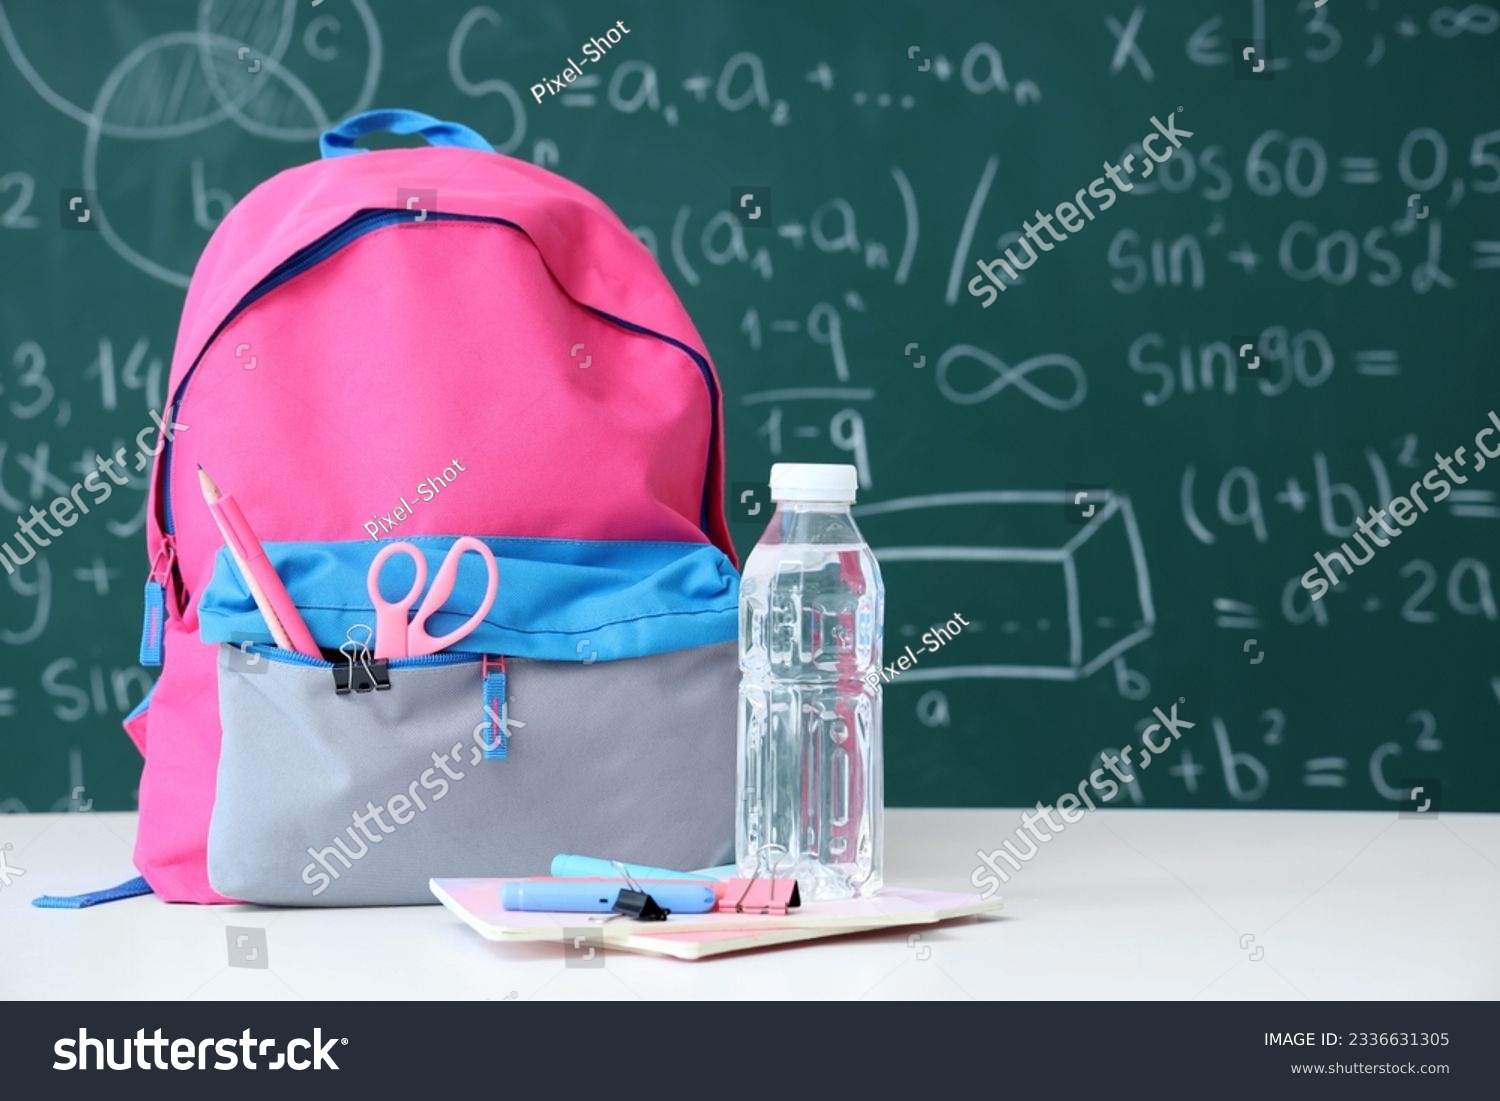 Colorful school backpack with bottle of water and stationery on white table near green chalkboard #2336631305